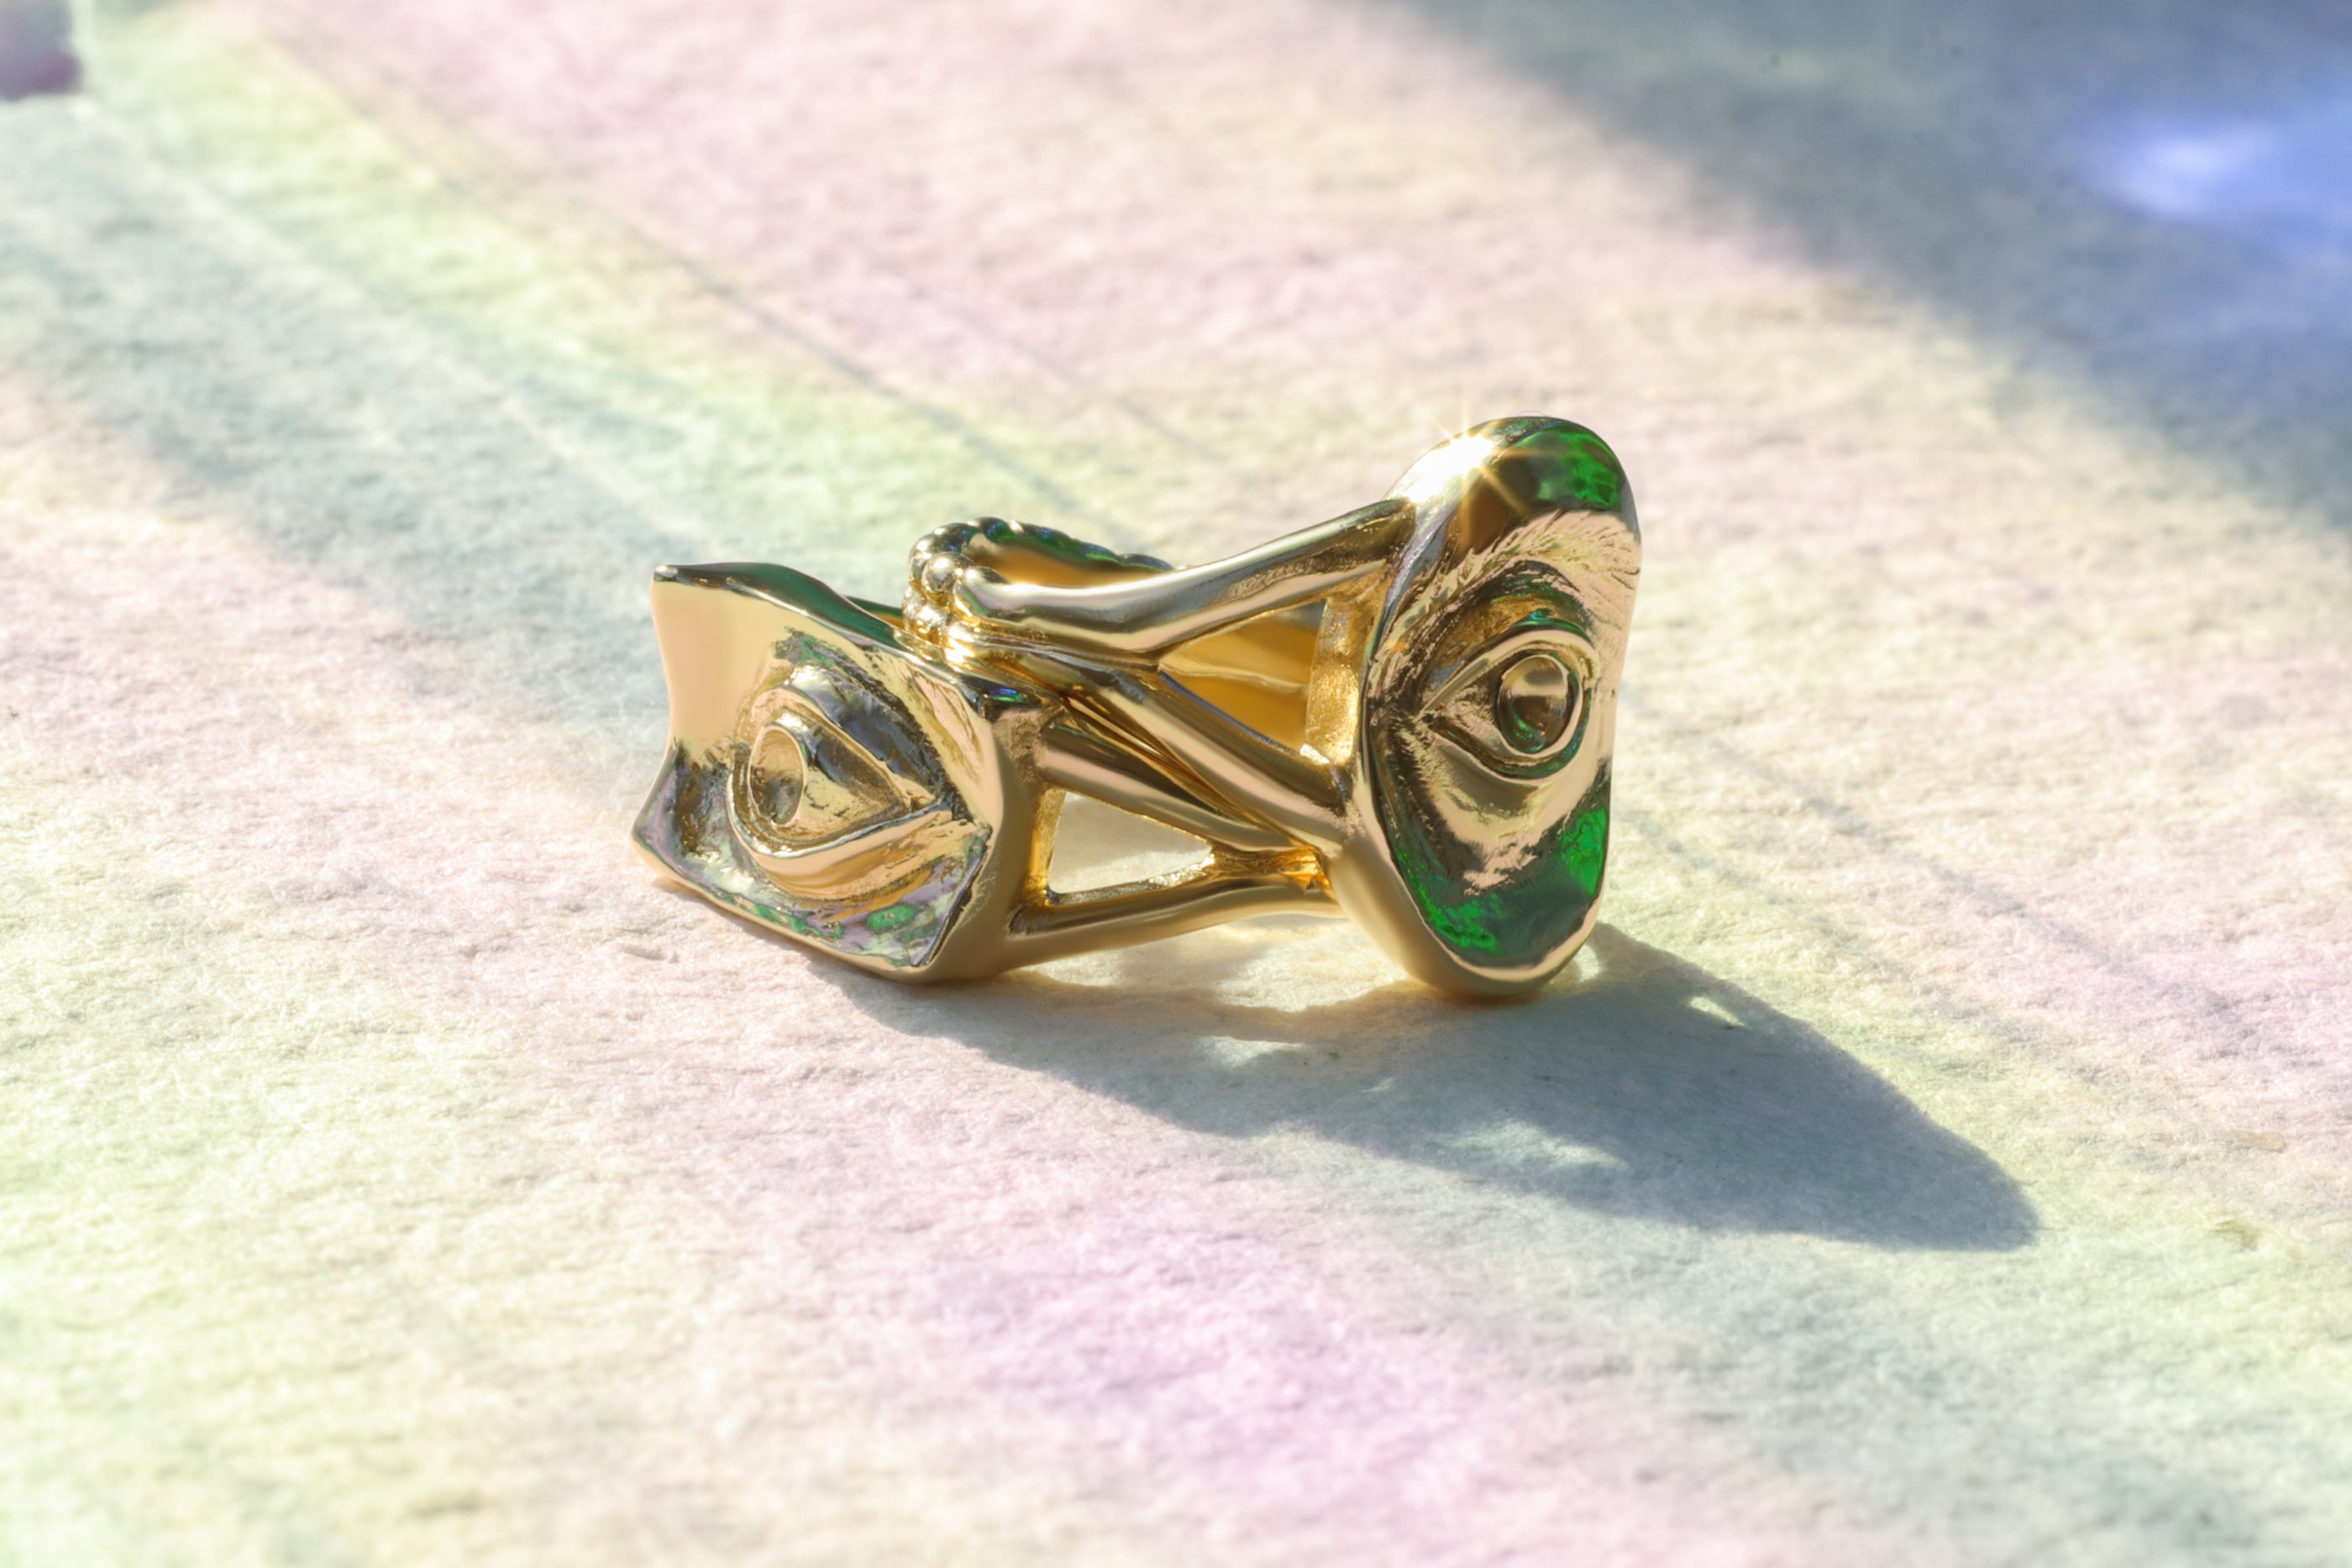 Intagliaux / Ring By Alfonzo in rings Category